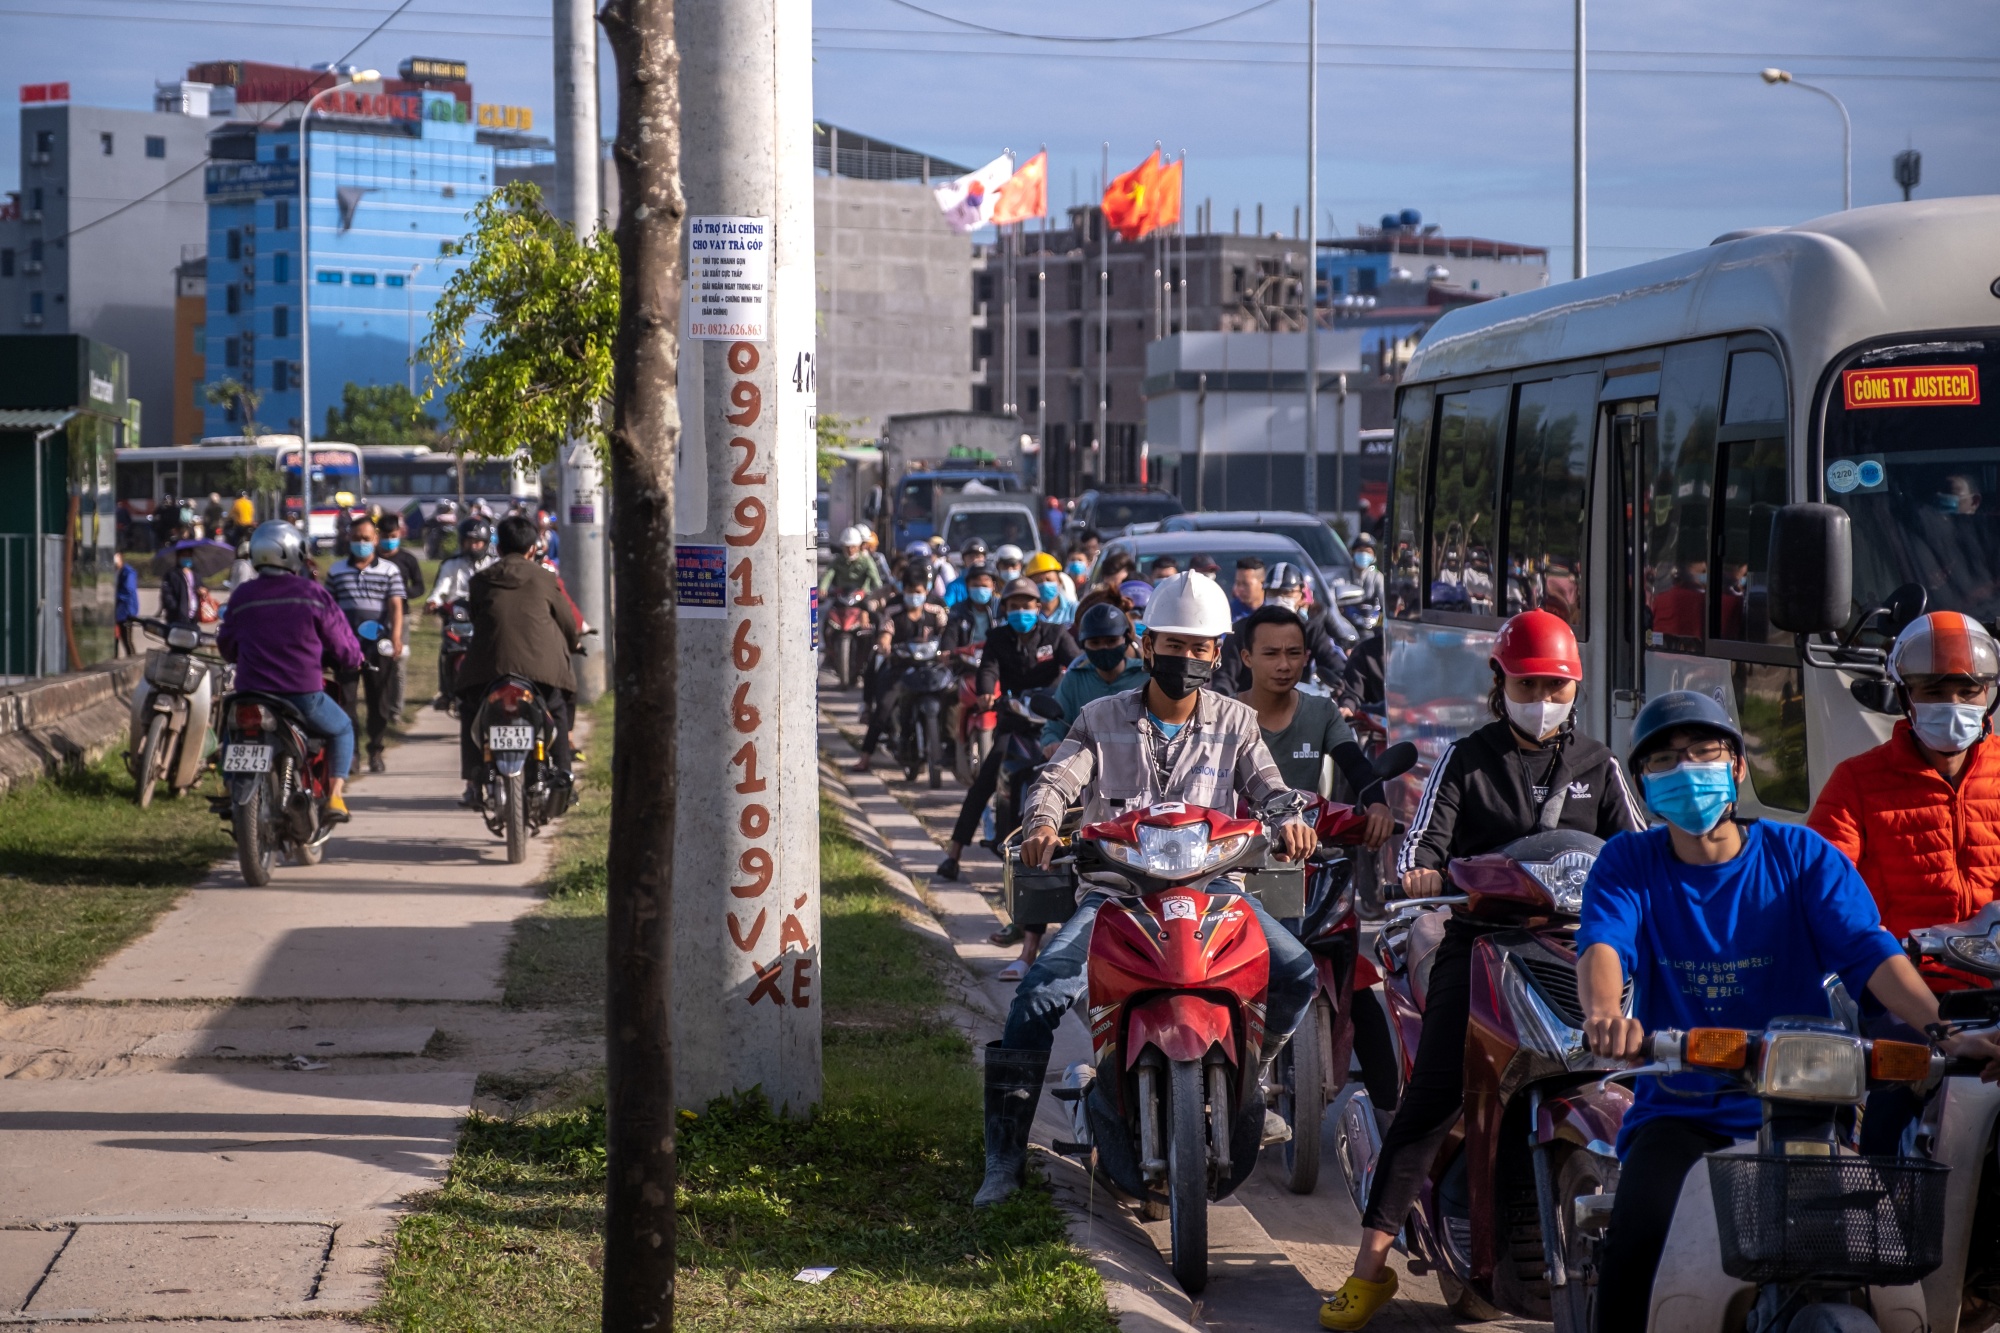 Commuters near the Van Trung Industrial Park in Bac Giang province, Vietnam.